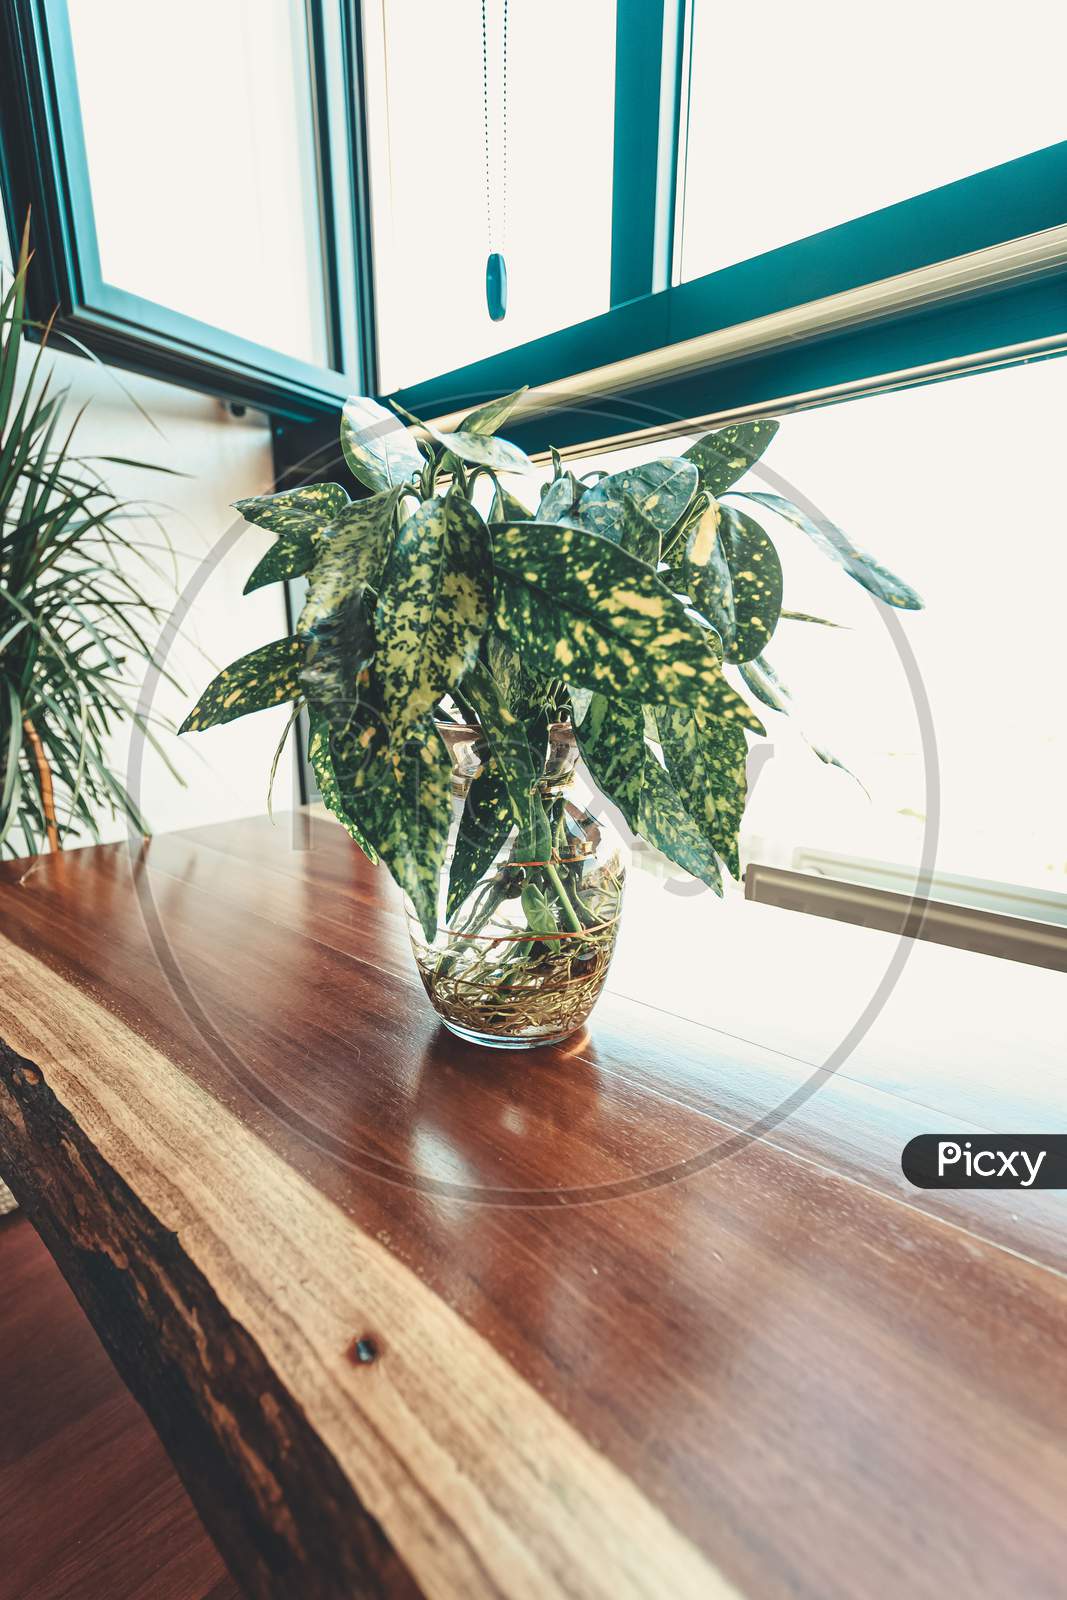 Ba Beautiful Plant Over A Wooden Table In Front Of A Bright Window